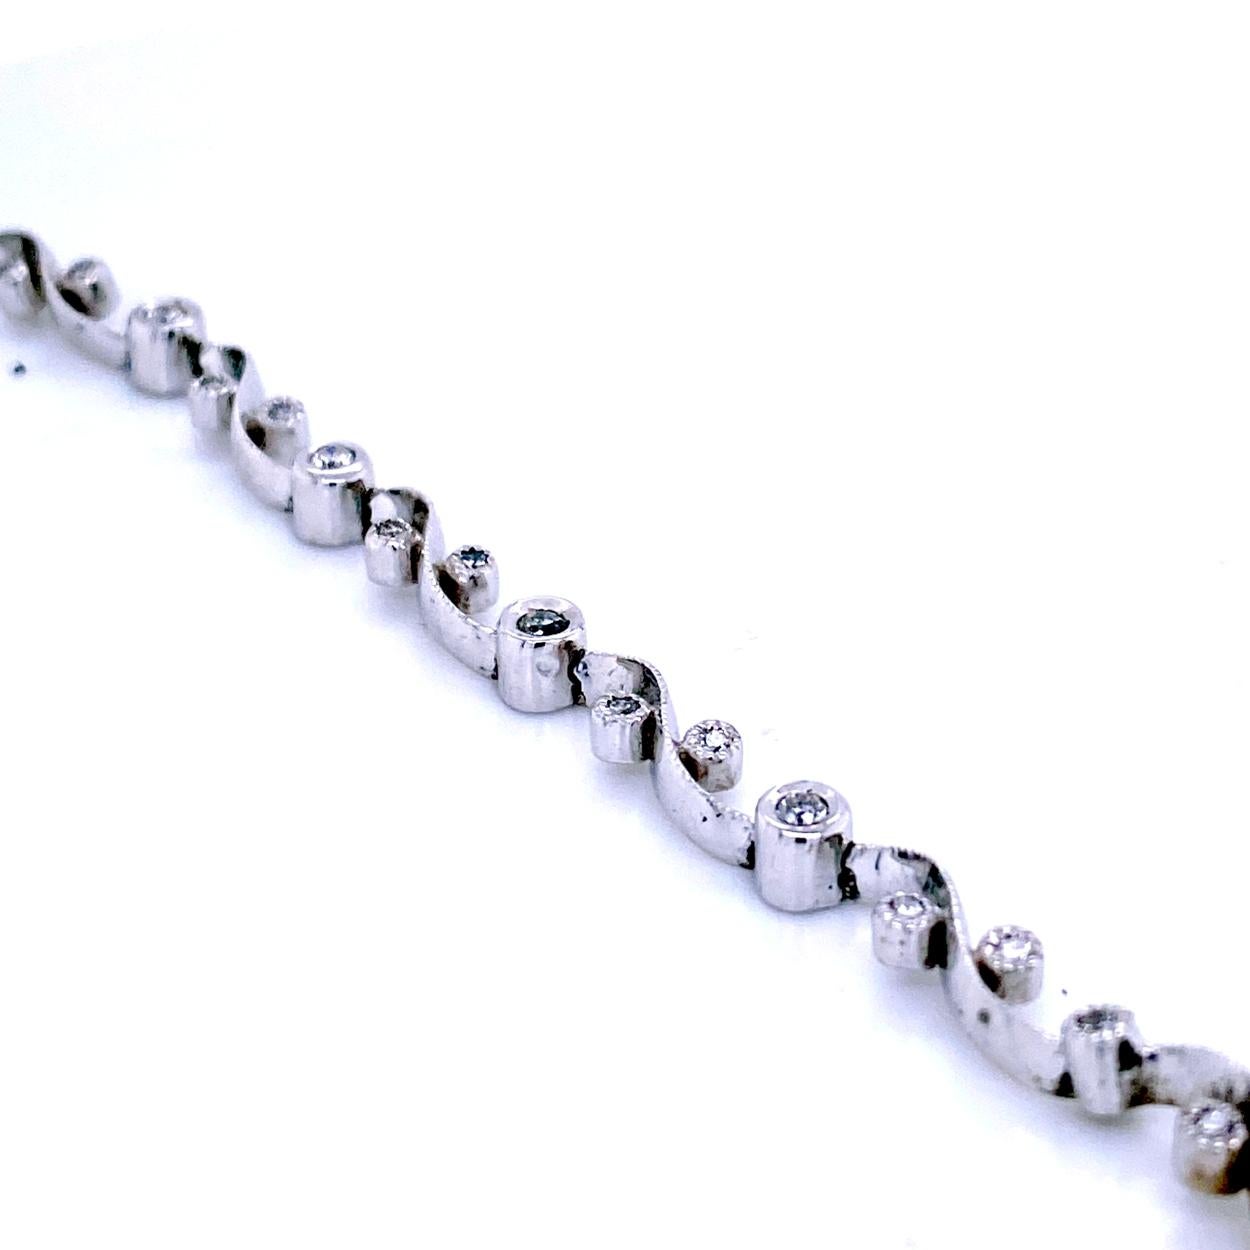 This Diamond Bracelet consists of 11 Links Bezel Set 1.2 mm Round Brilliant diamonds and 5 Bezel Set 1.8 mm Round Brilliant diamonds centrally located set in between the links to present an impressive look. The bracelet is made in 18K Gold with